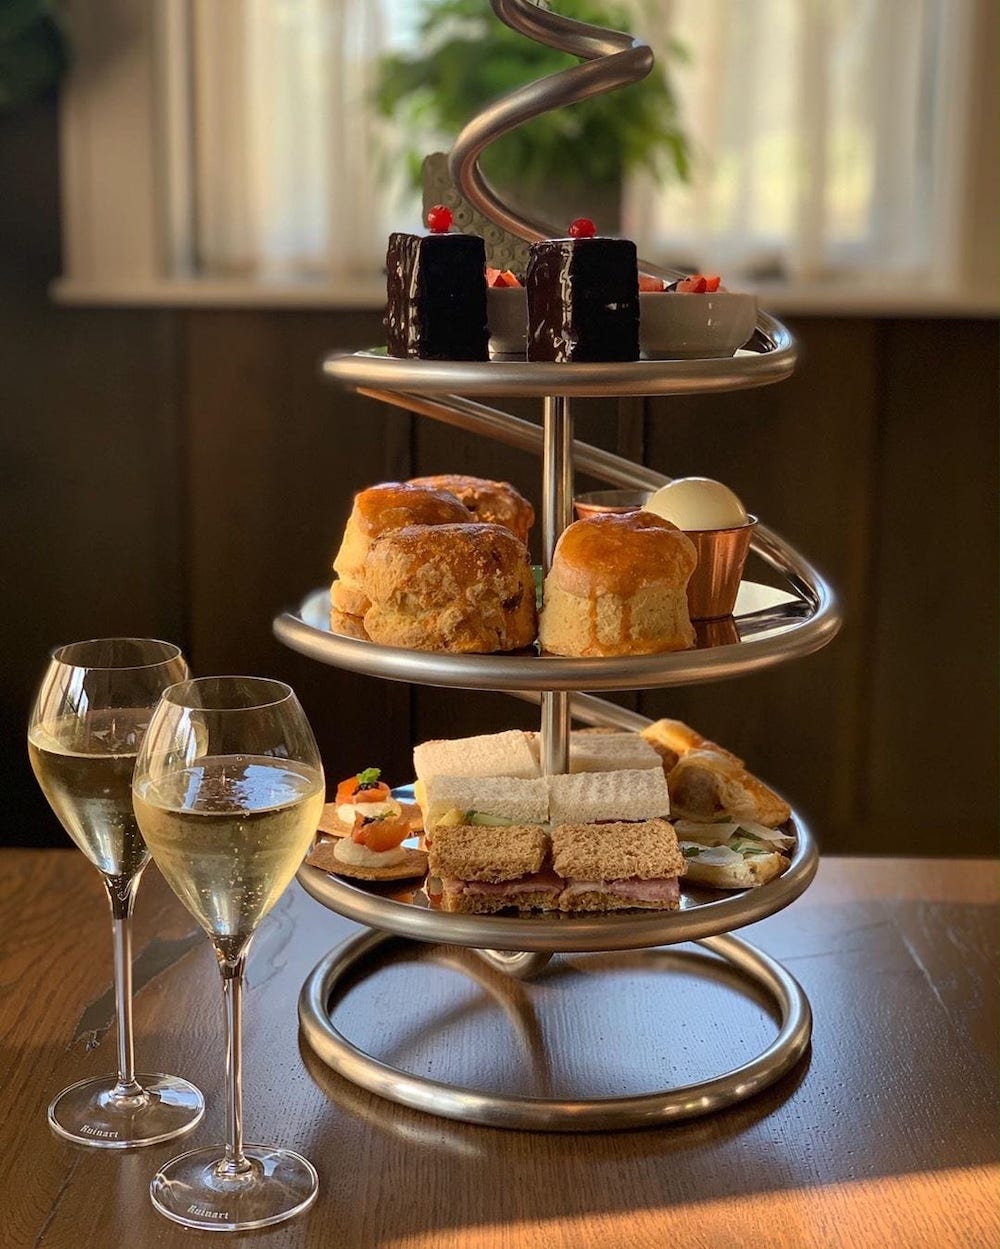 Win champagne afternoon tea for four at Hurley House Hotel, worth £200